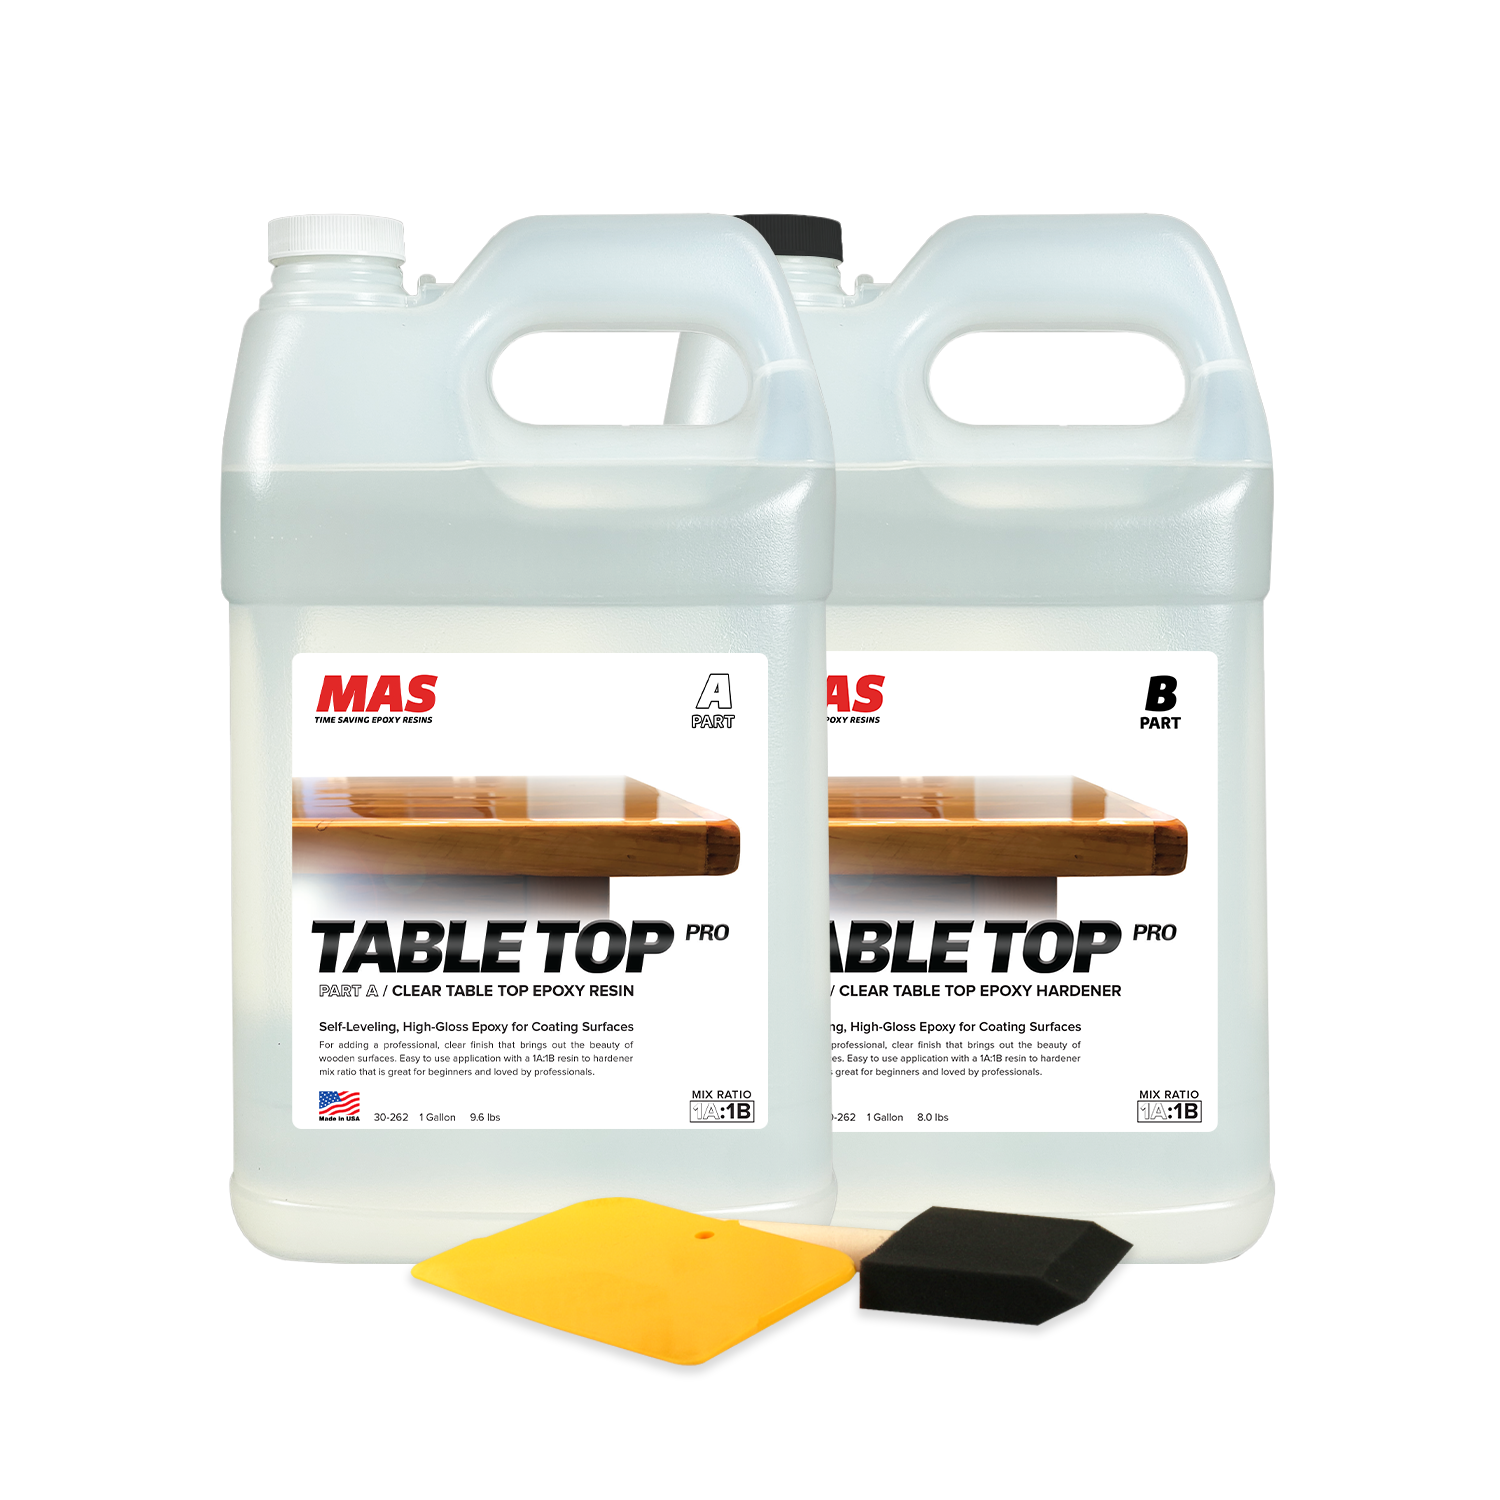 Table Top Pro Epoxy Resin and Hardener Bundle Kit Questions & Answers